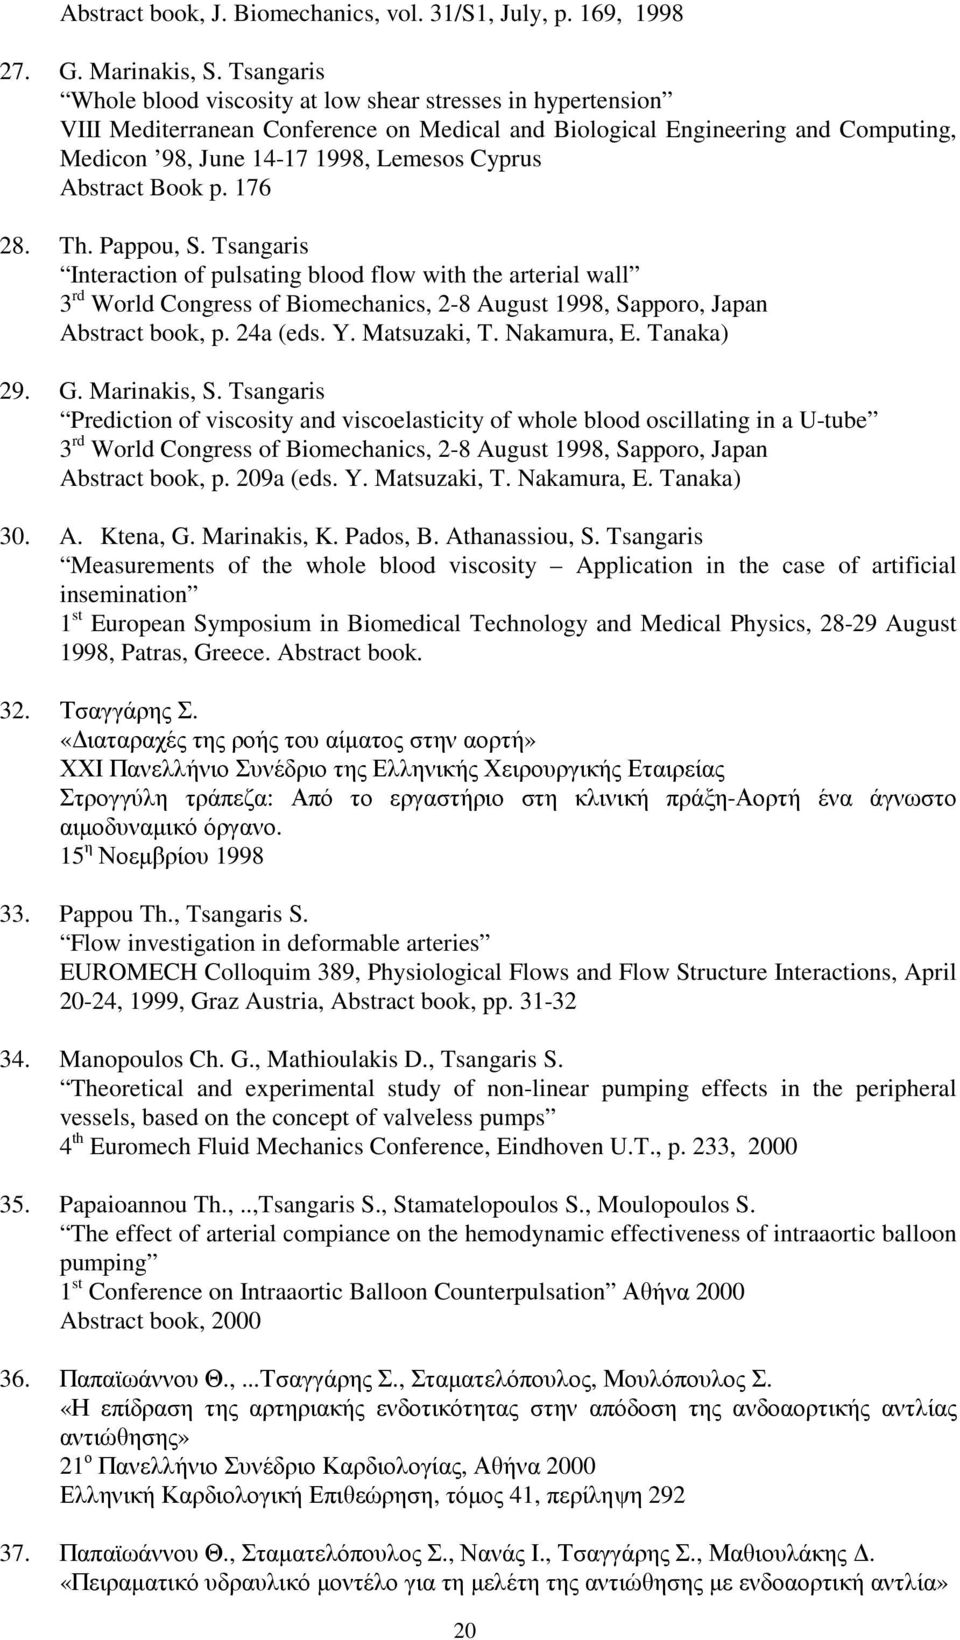 Abstract Book p. 176 28. Th. Pappou, S. Tsangaris Interaction of pulsating blood flow with the arterial wall 3 rd World Congress of Biomechanics, 2-8 August 1998, Sapporo, Japan Abstract book, p.